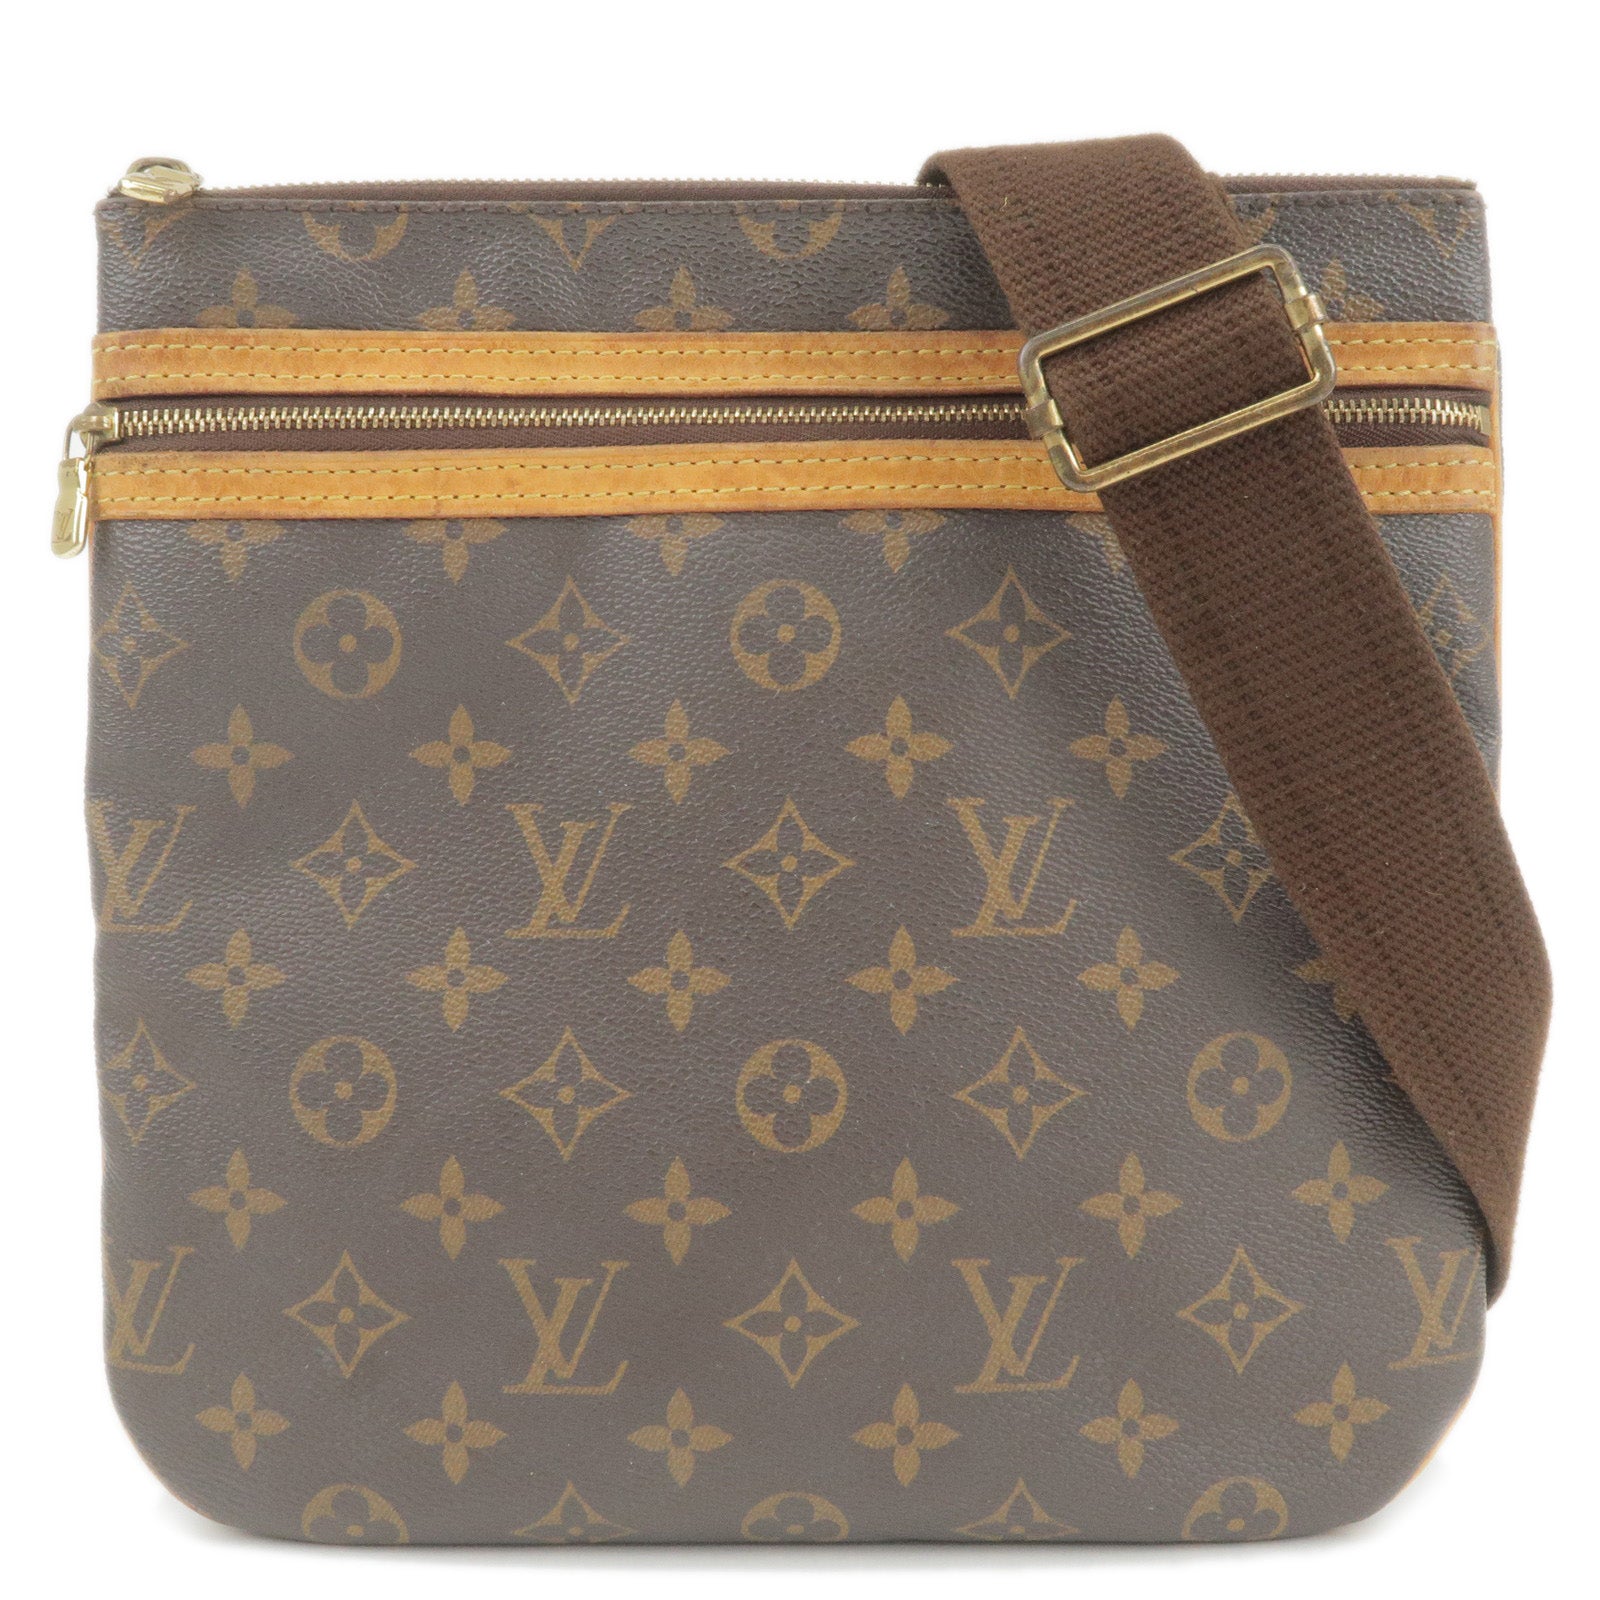 12 Louis Vuitton SS21 Bags That Are Worth Waiting For